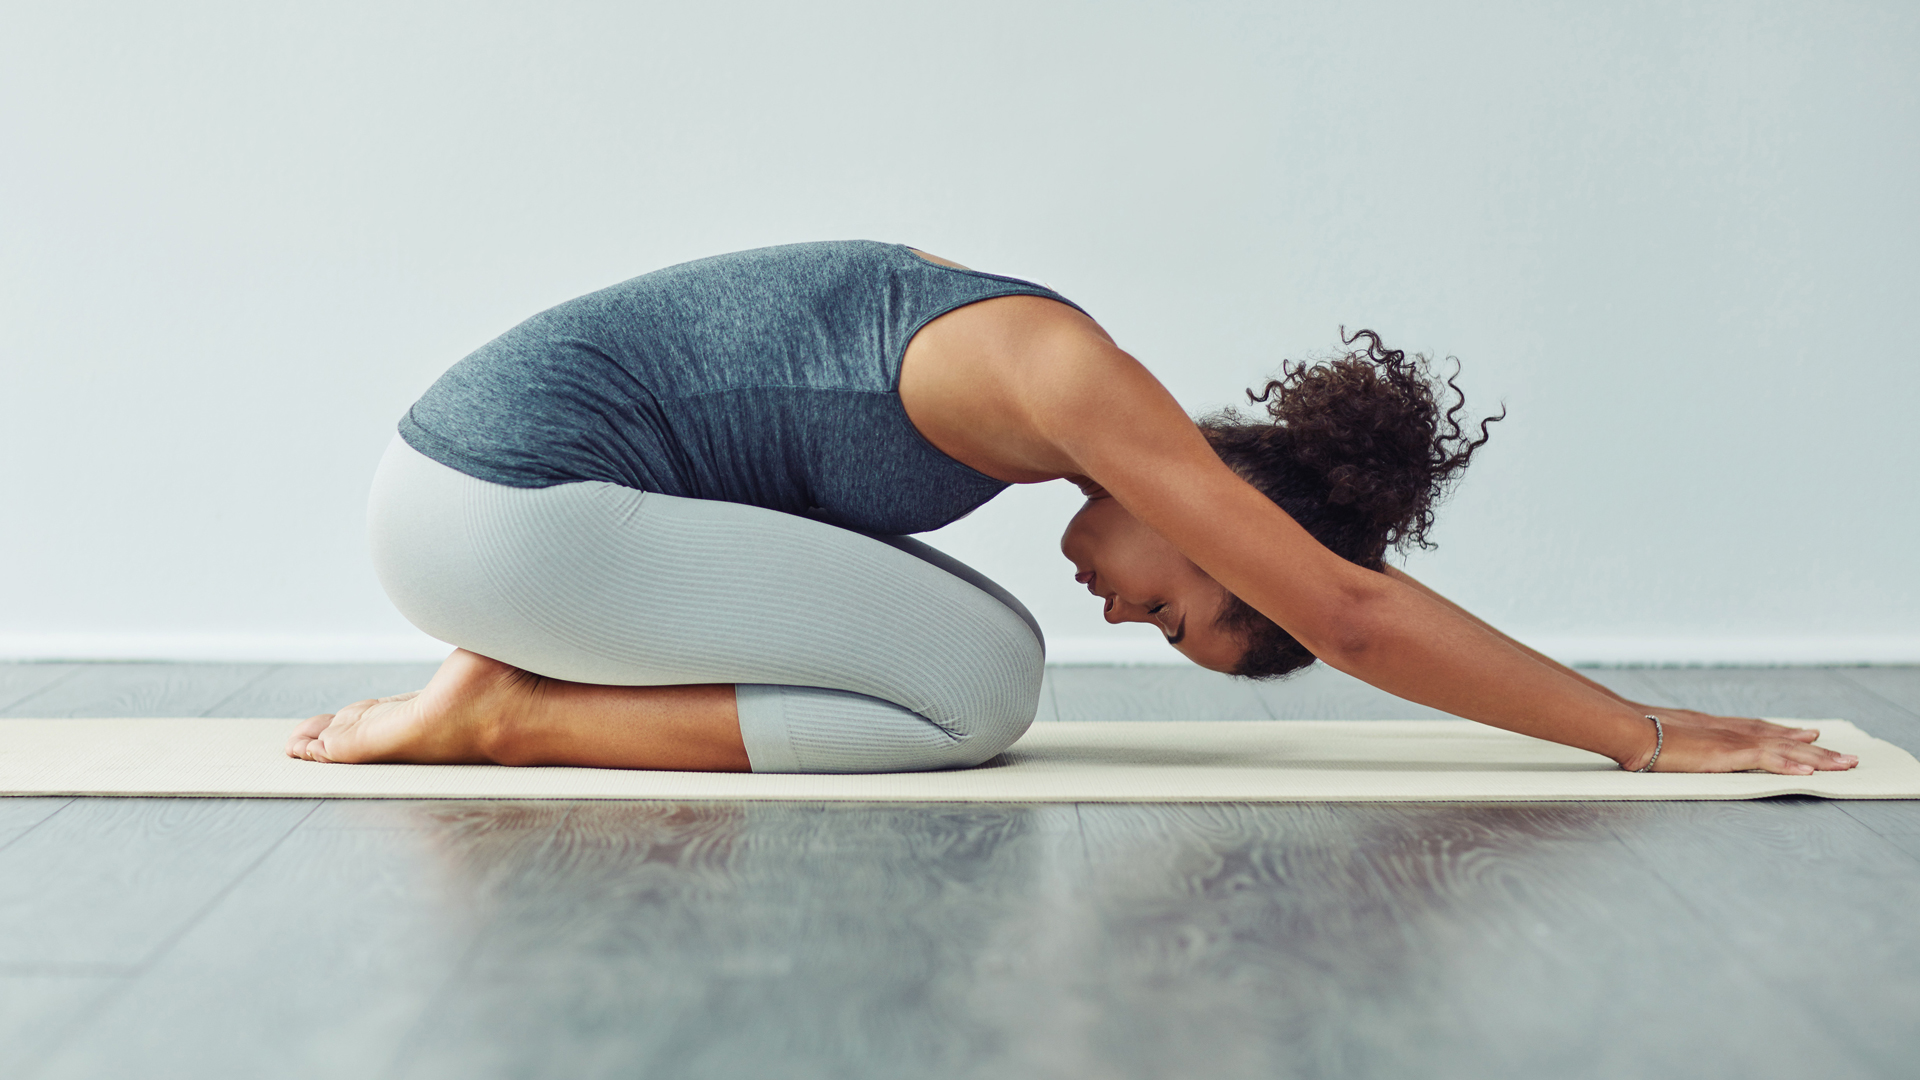 Menstrual cramps and yoga – Yoga poses to relieve period pain | The